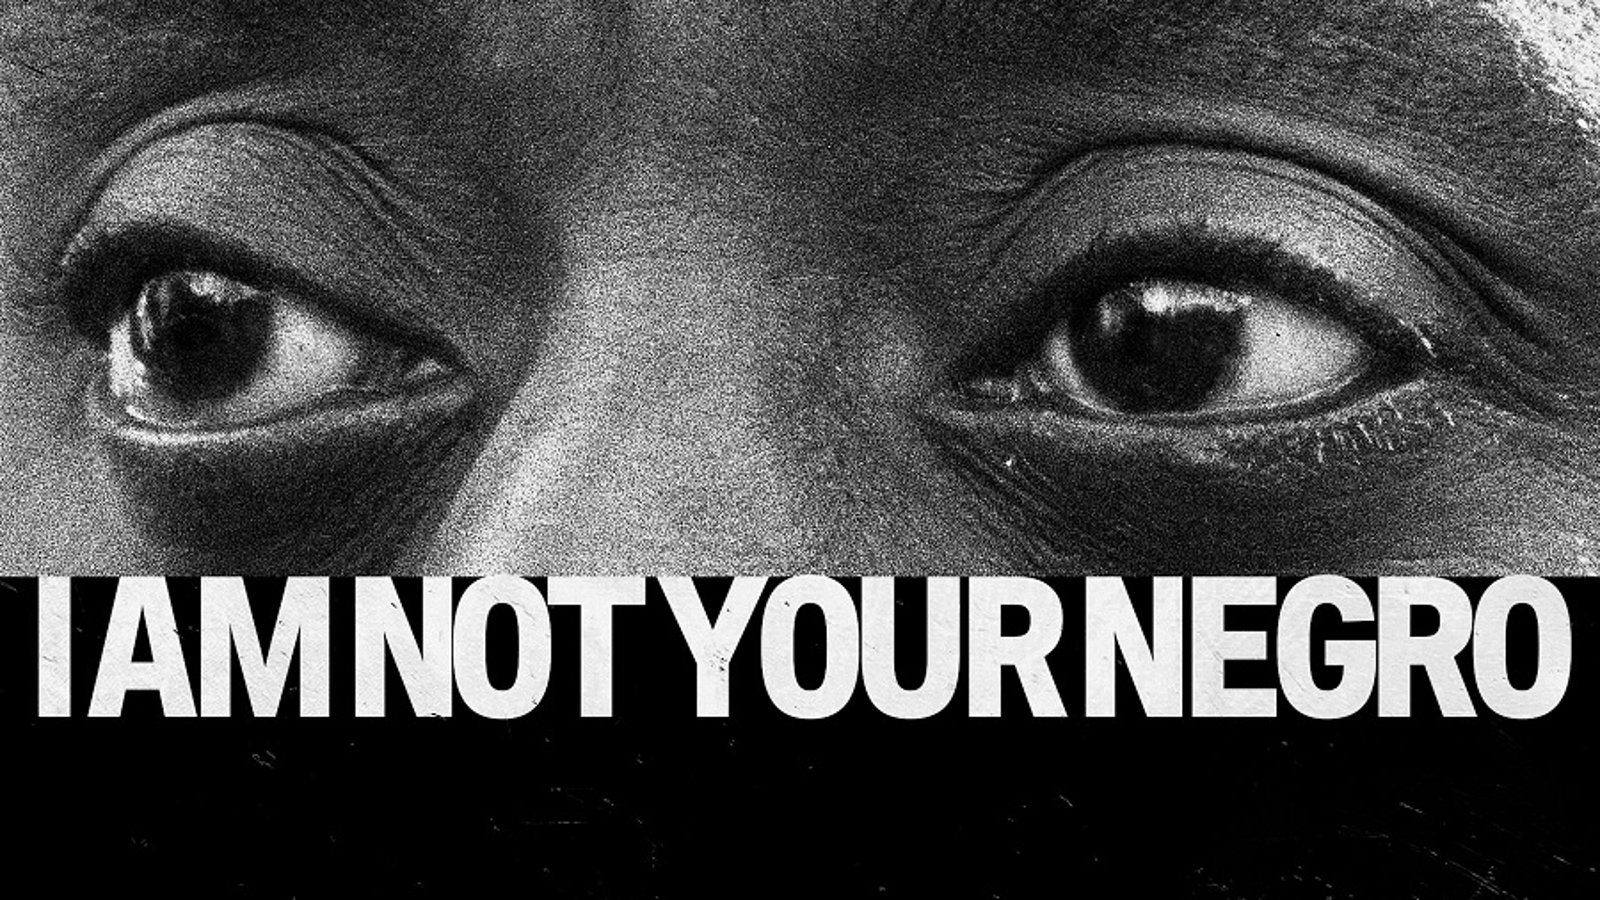 I Am Not Your Negro - James Baldwin and Race in America